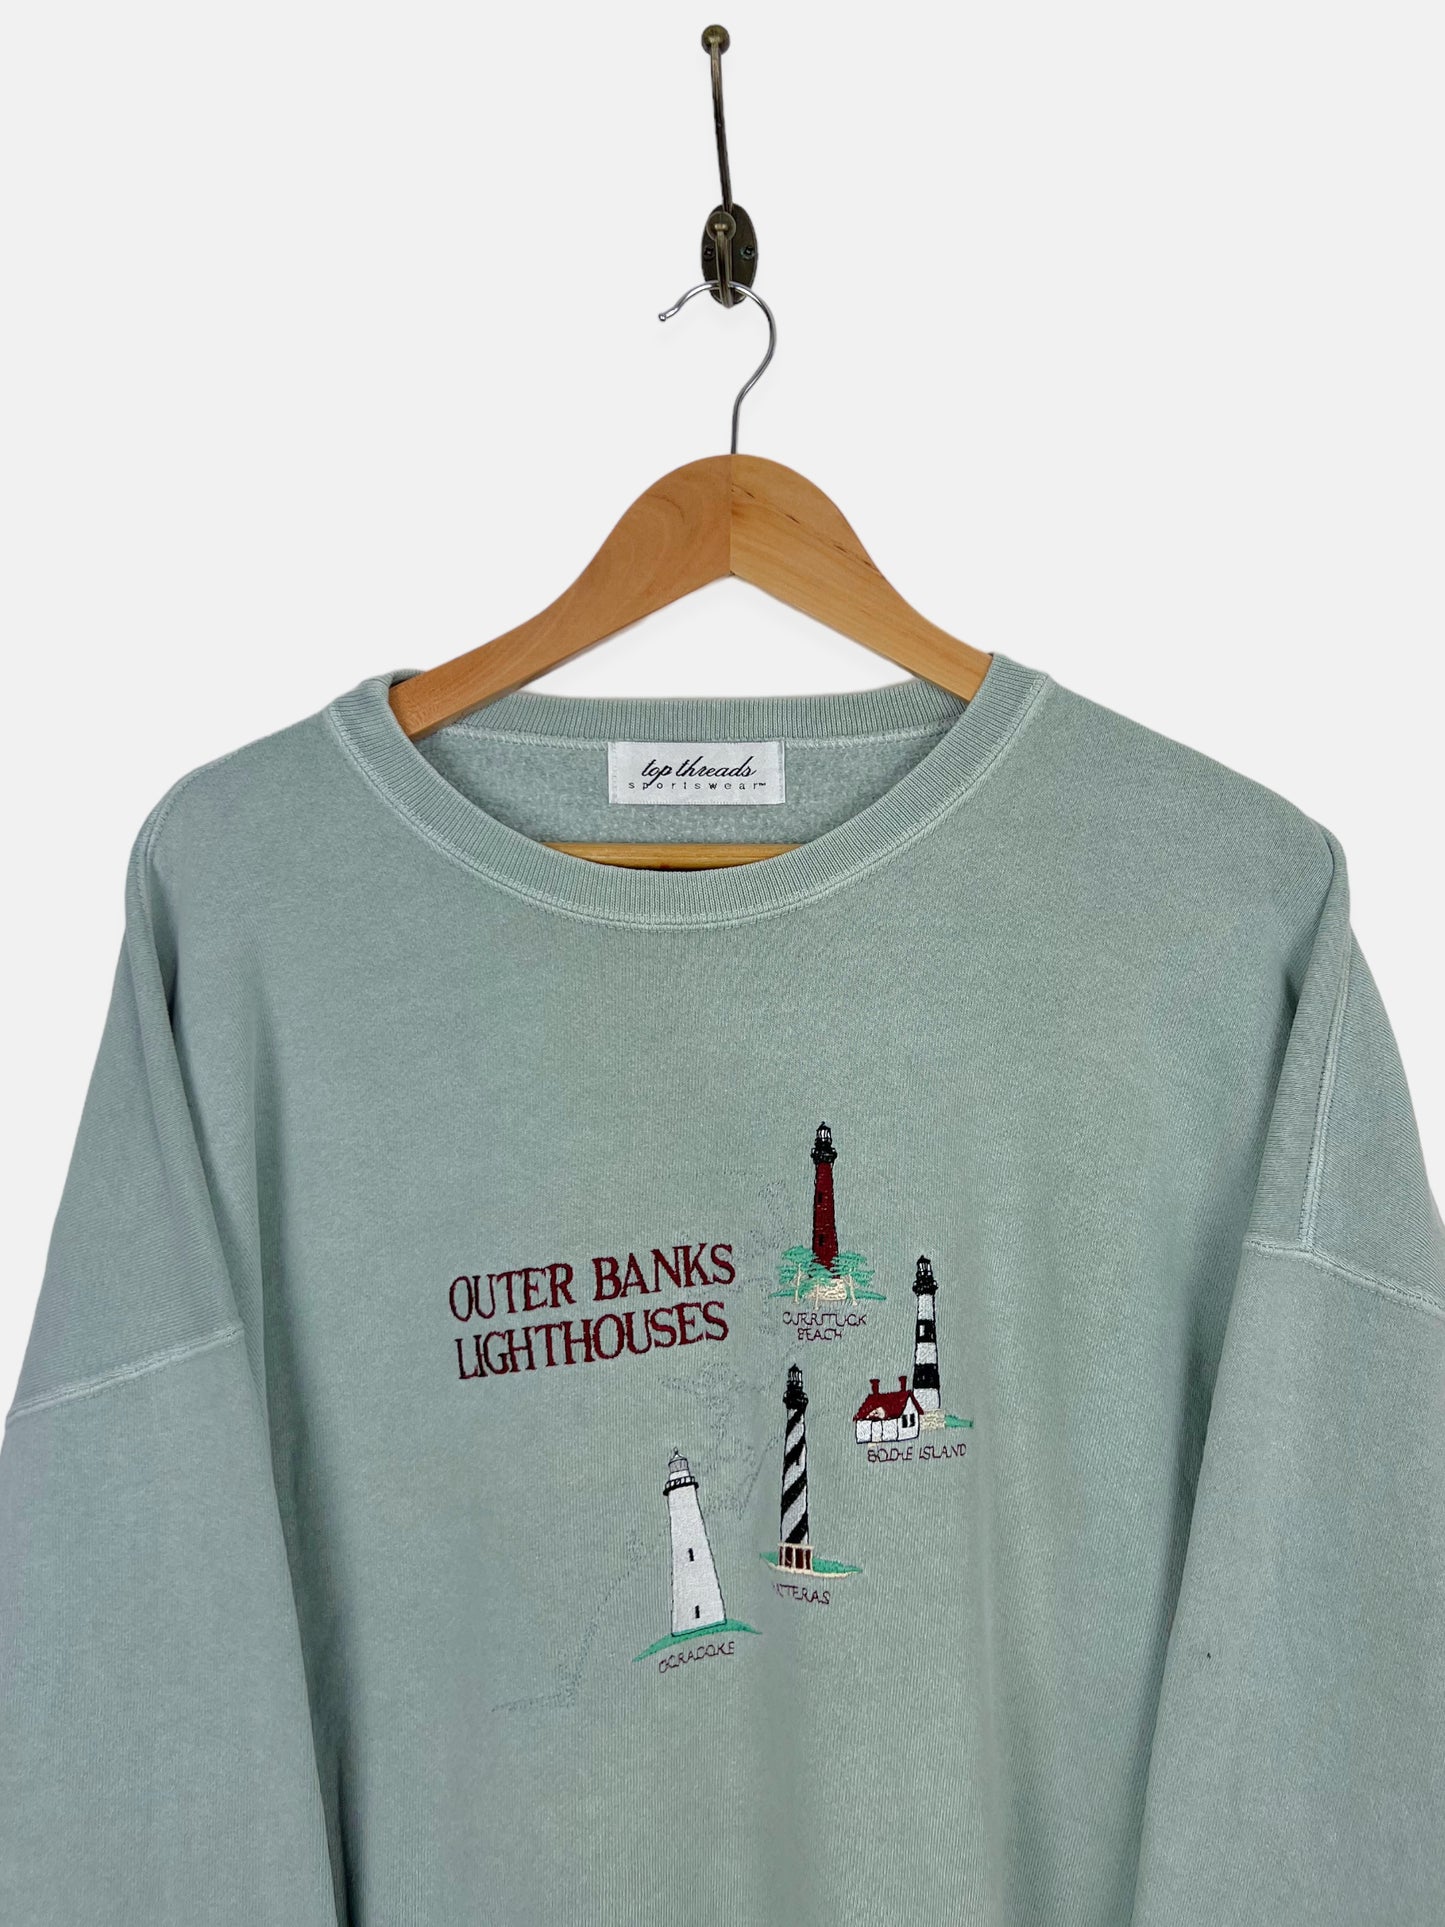 90's Outer Banks Lighthouses Embroidered Vintage Sweatshirt Size 2-3XL